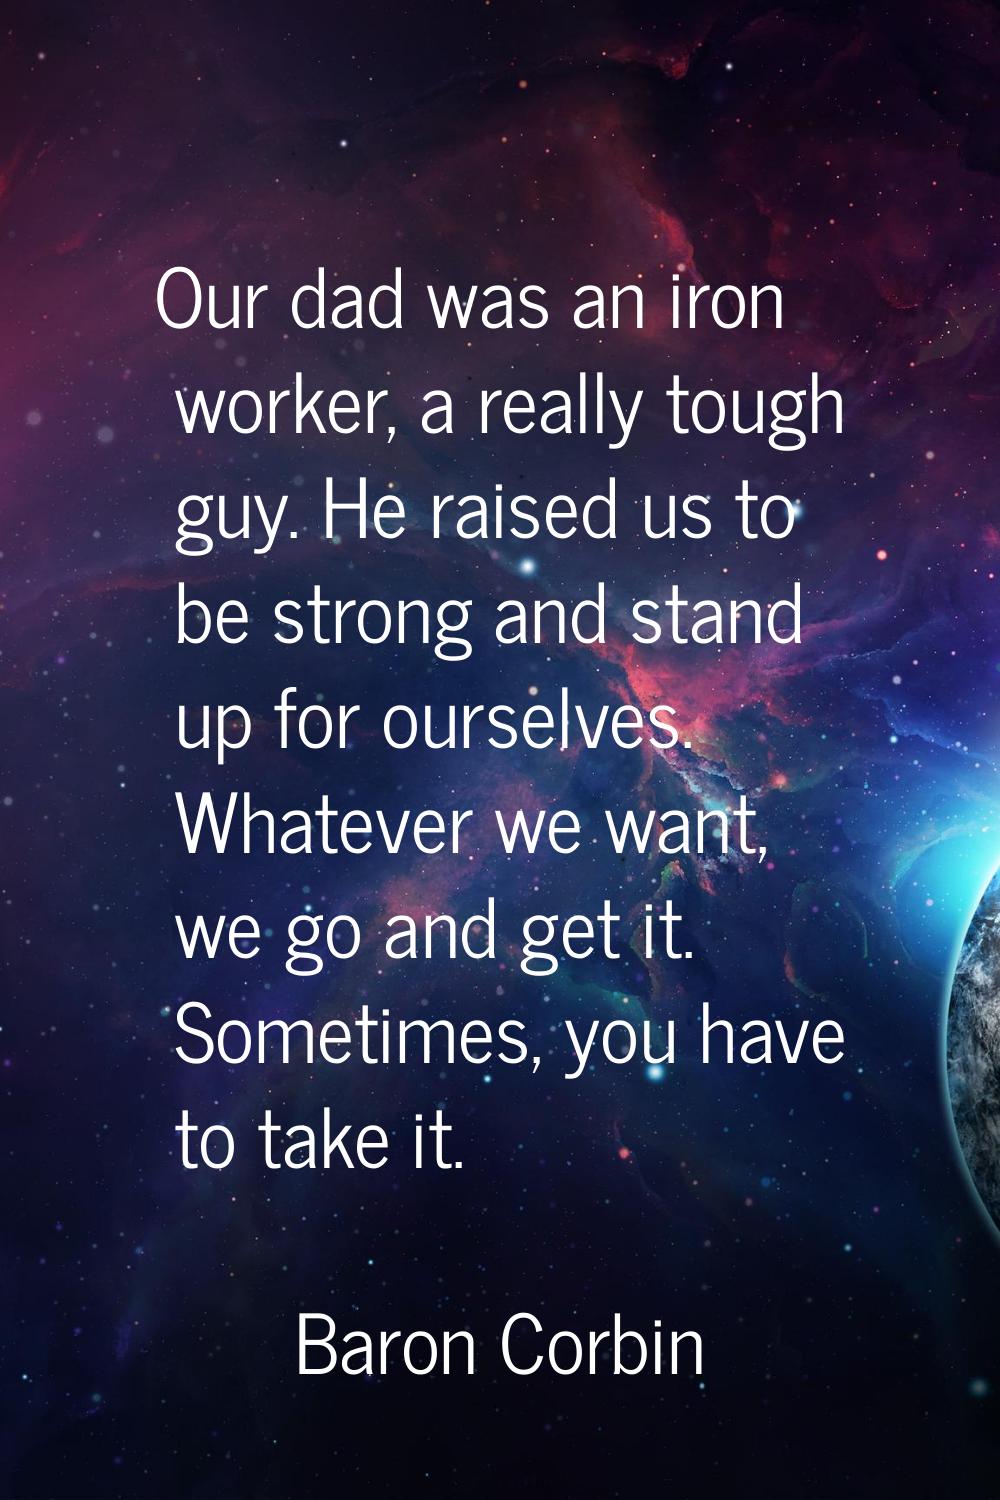 Our dad was an iron worker, a really tough guy. He raised us to be strong and stand up for ourselve